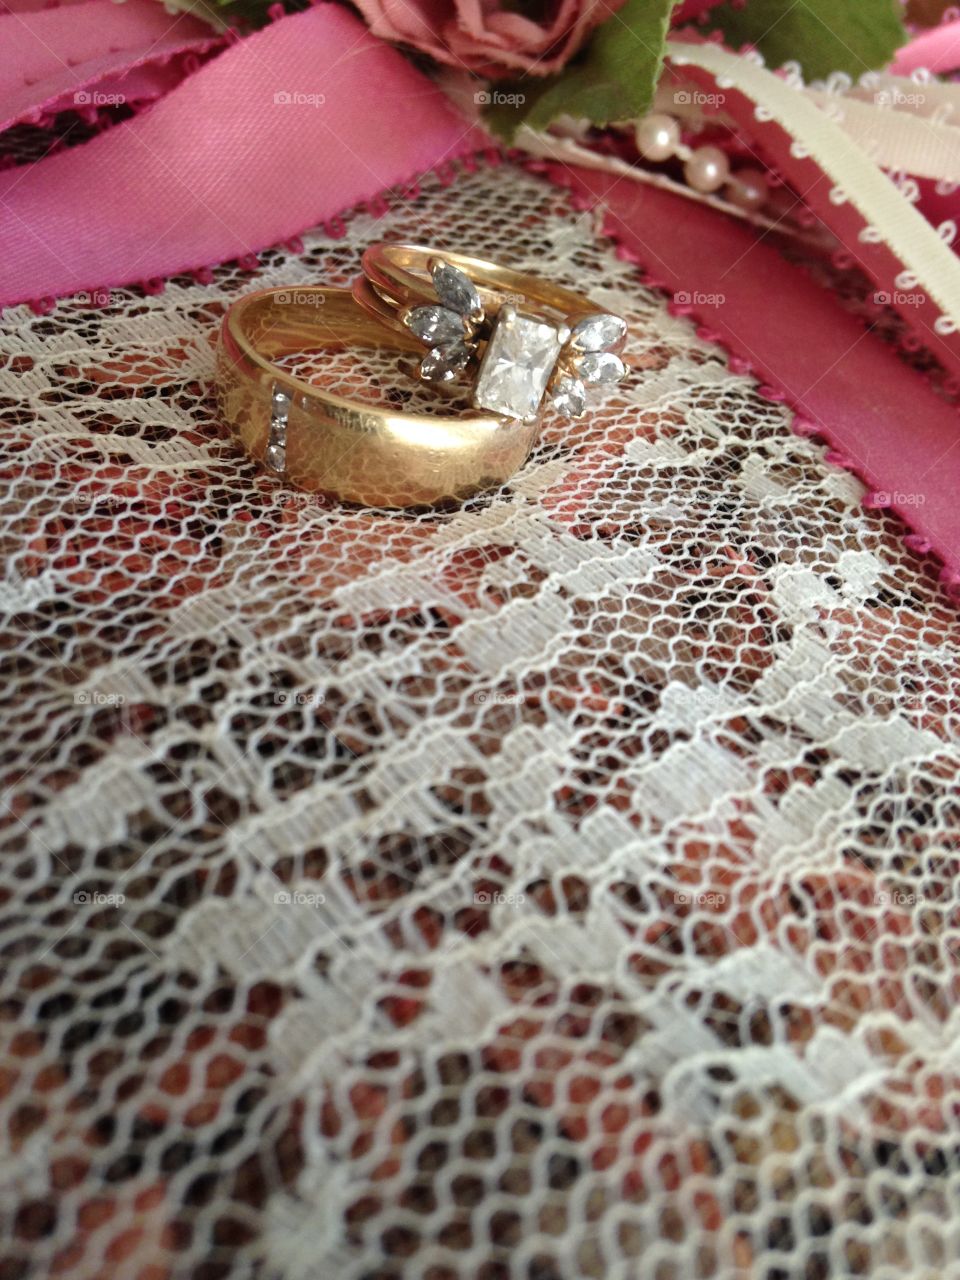 Wedding rings and lace